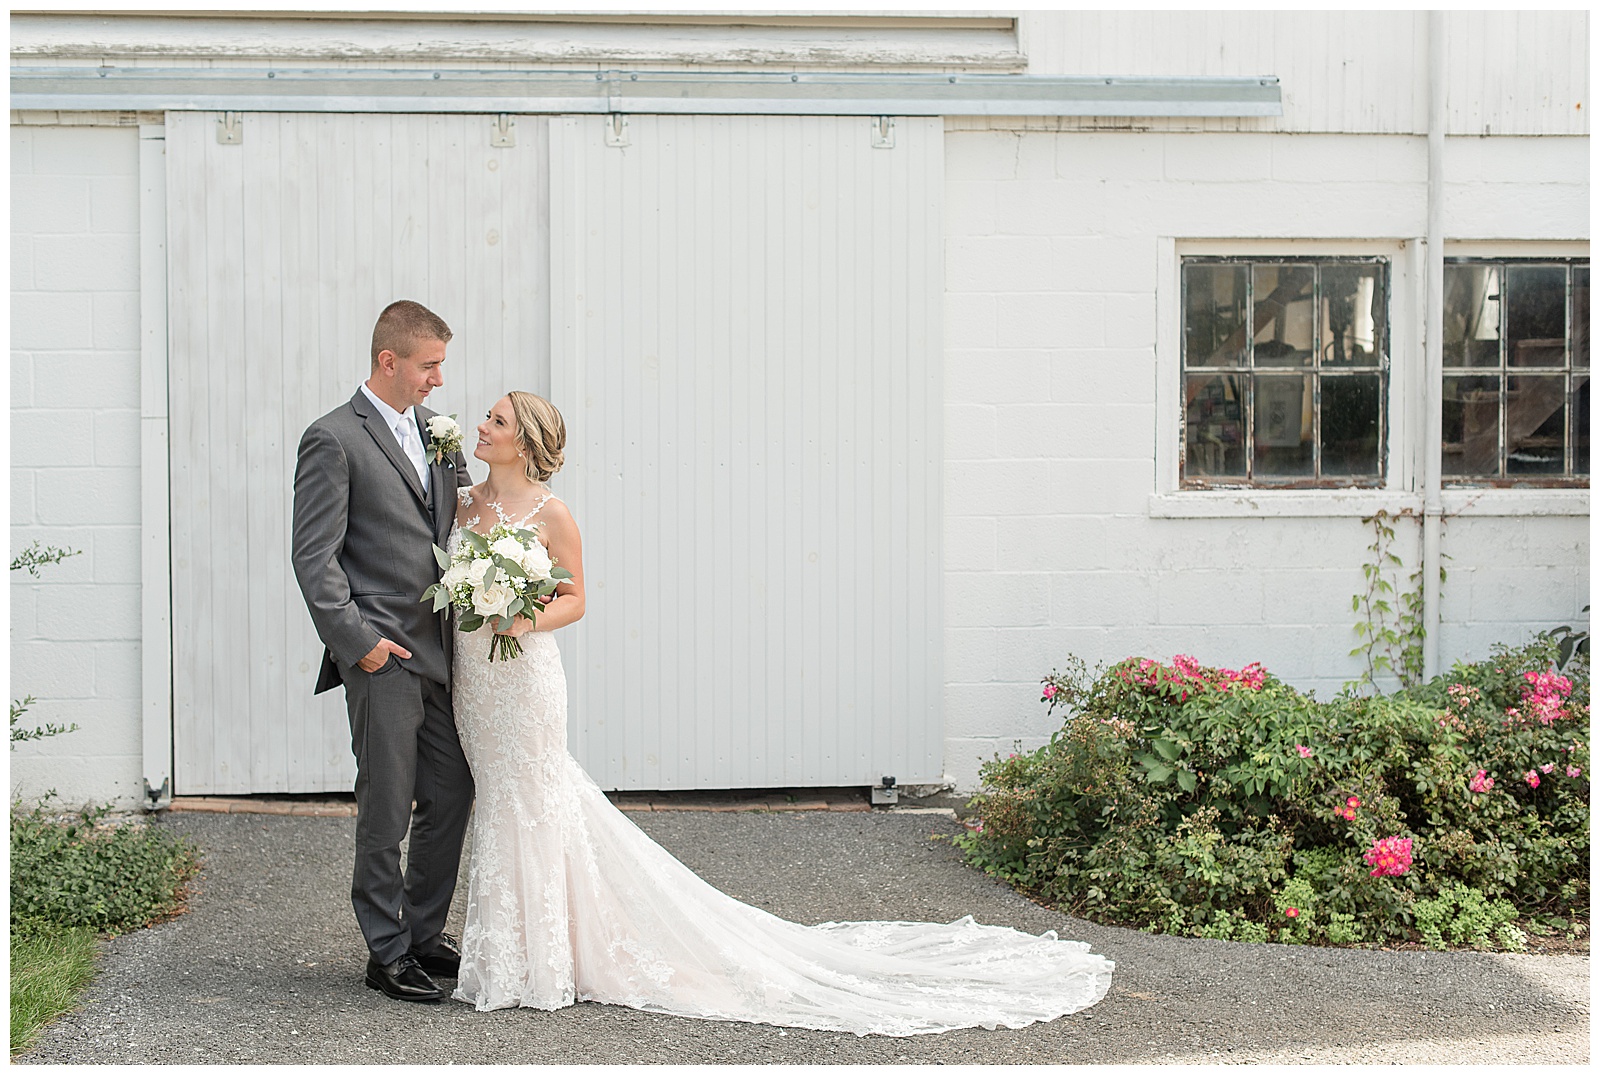 the couple are on the left side of the photo standing in the driveway in front of the white barn with a large potted plant sitting on the right side of the photo on the driveway and the couple is side hugging and looking at each other while smiling with the groom on the left and the bride on the right holding her bouquet of flowers and the train of her dress is stretched out along her left side on the driveway at Lakefield Wedding in Manheim, PA